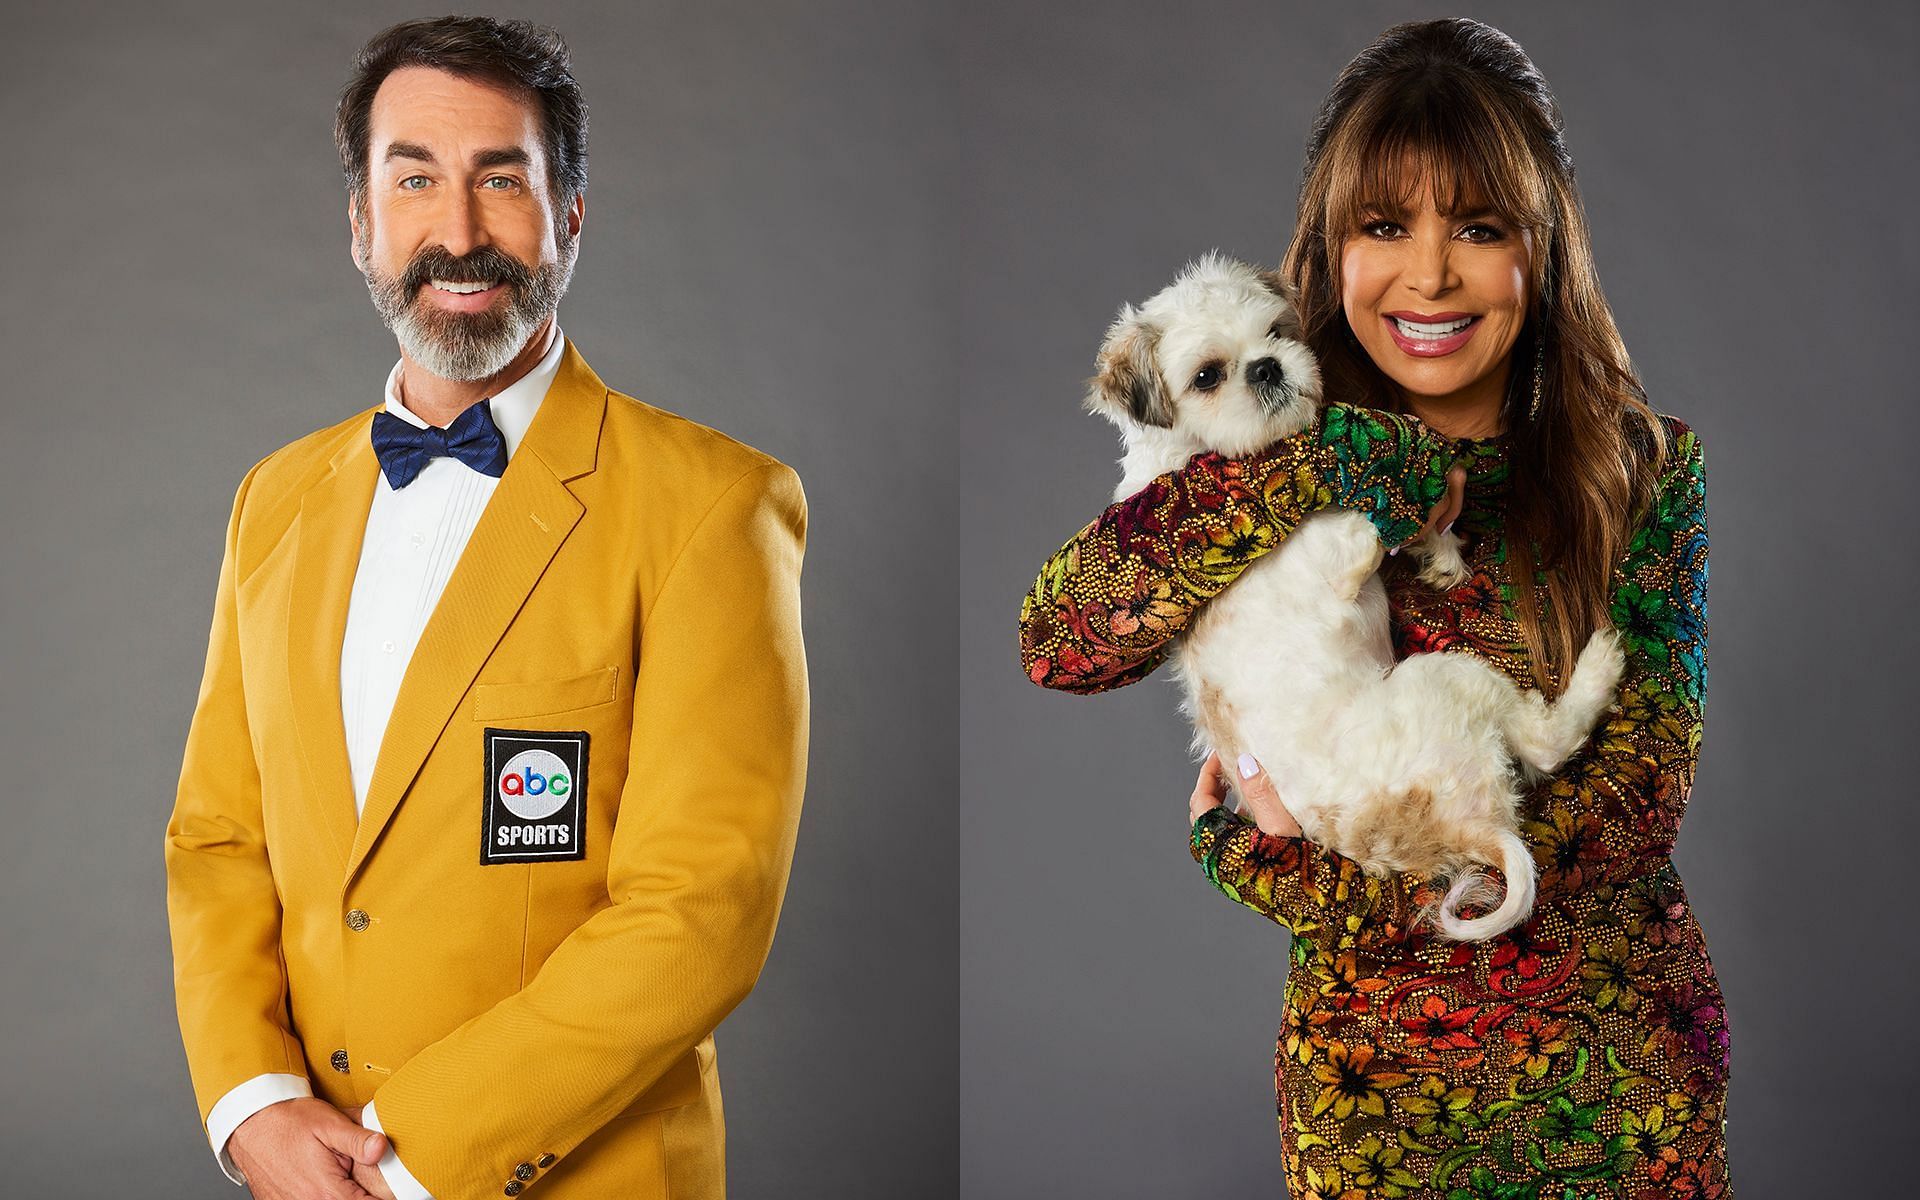 Host Rob Riggle and judge Paula Abdul to star in The American Rescue Dog Show on May 25 (Image via ABC/Maarten de Boer)